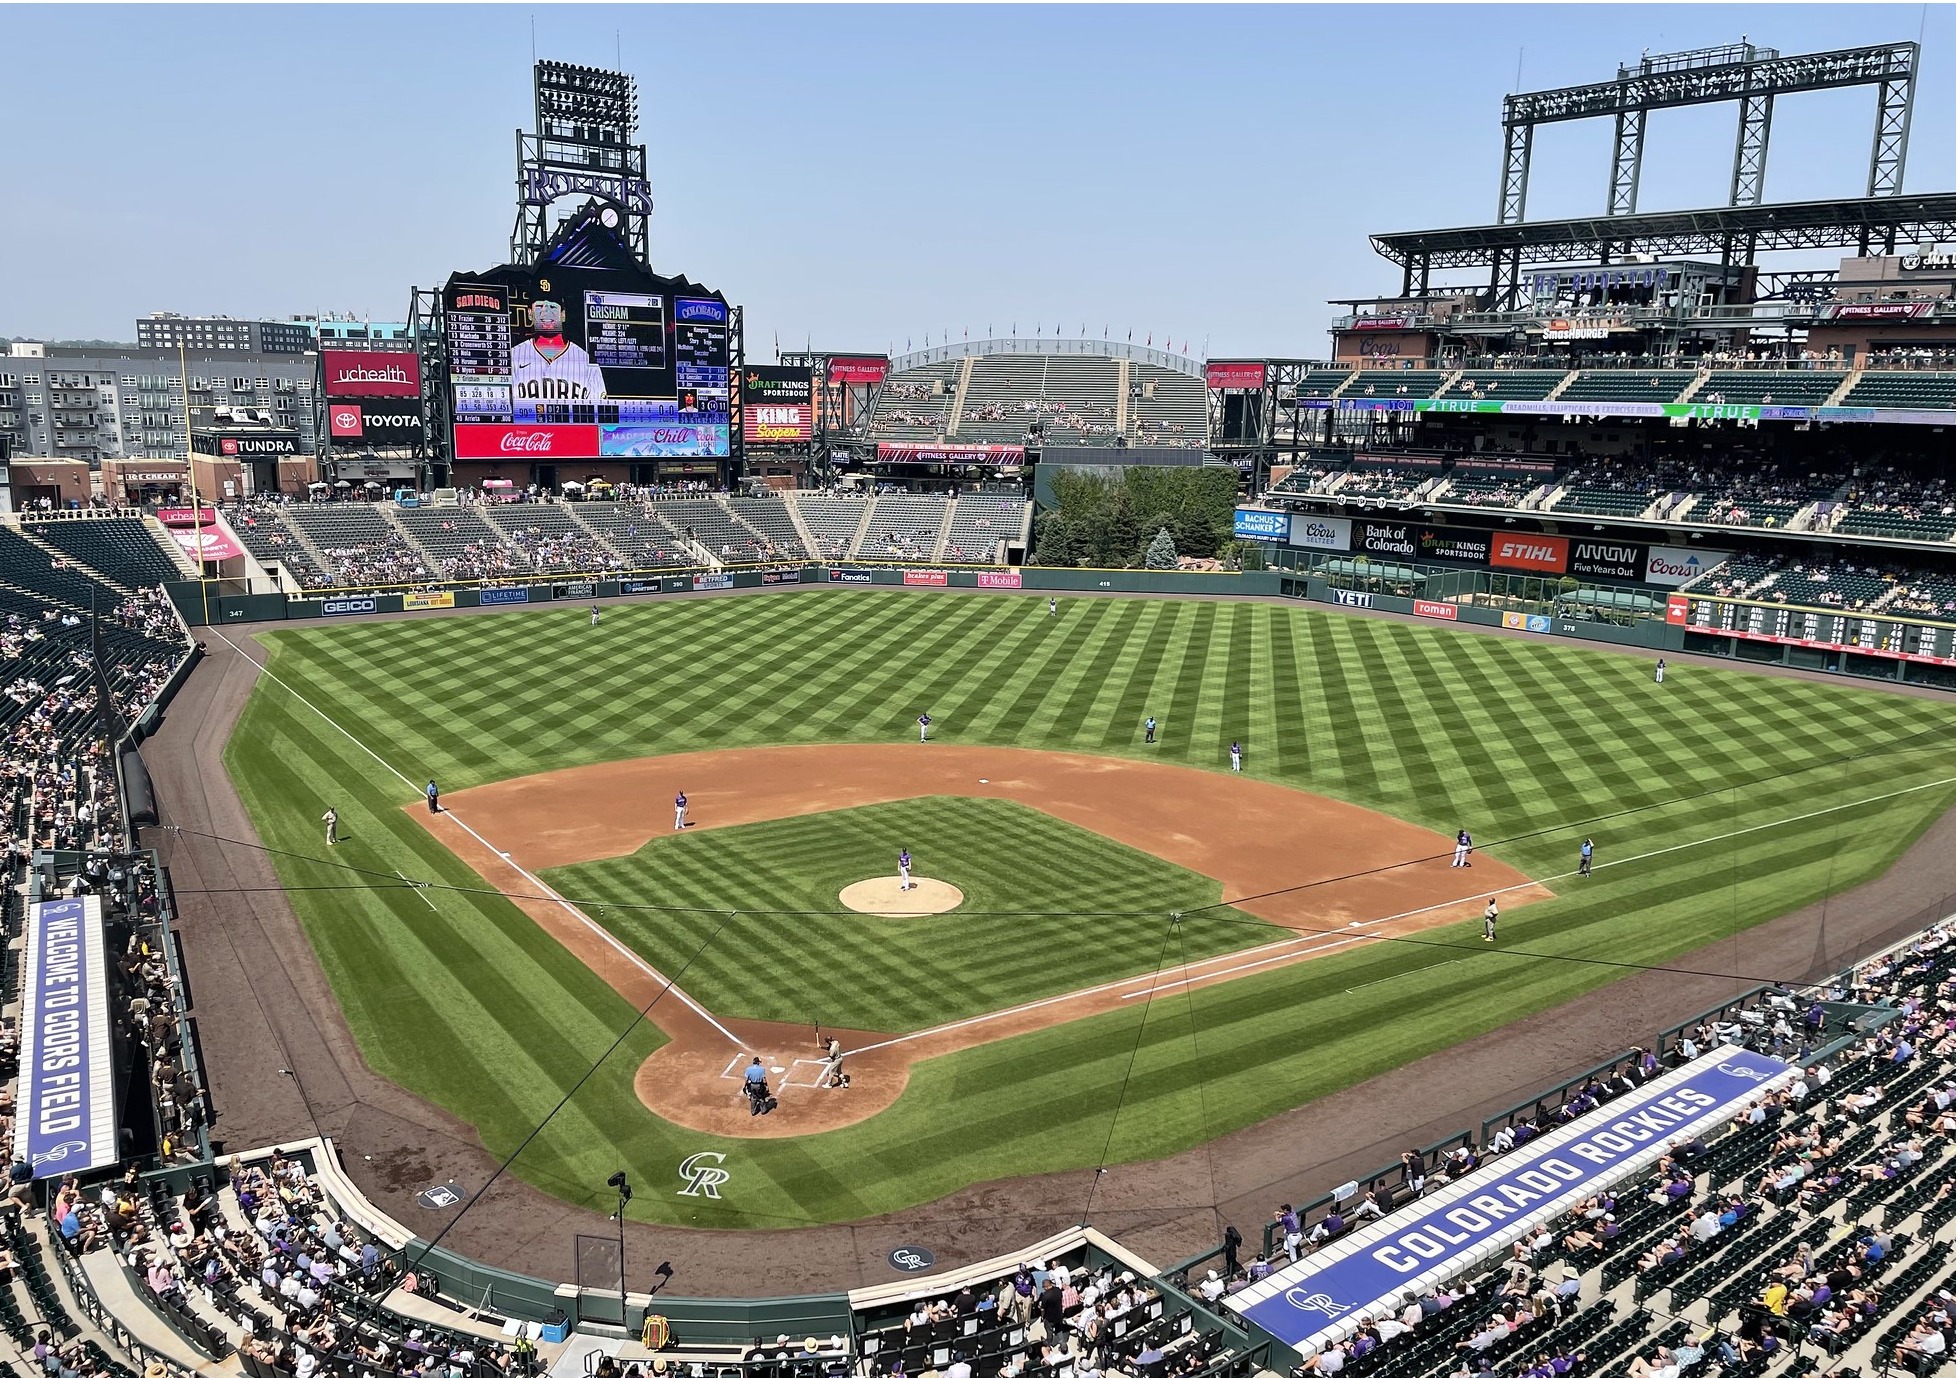 View from the upper deck at Coors Field